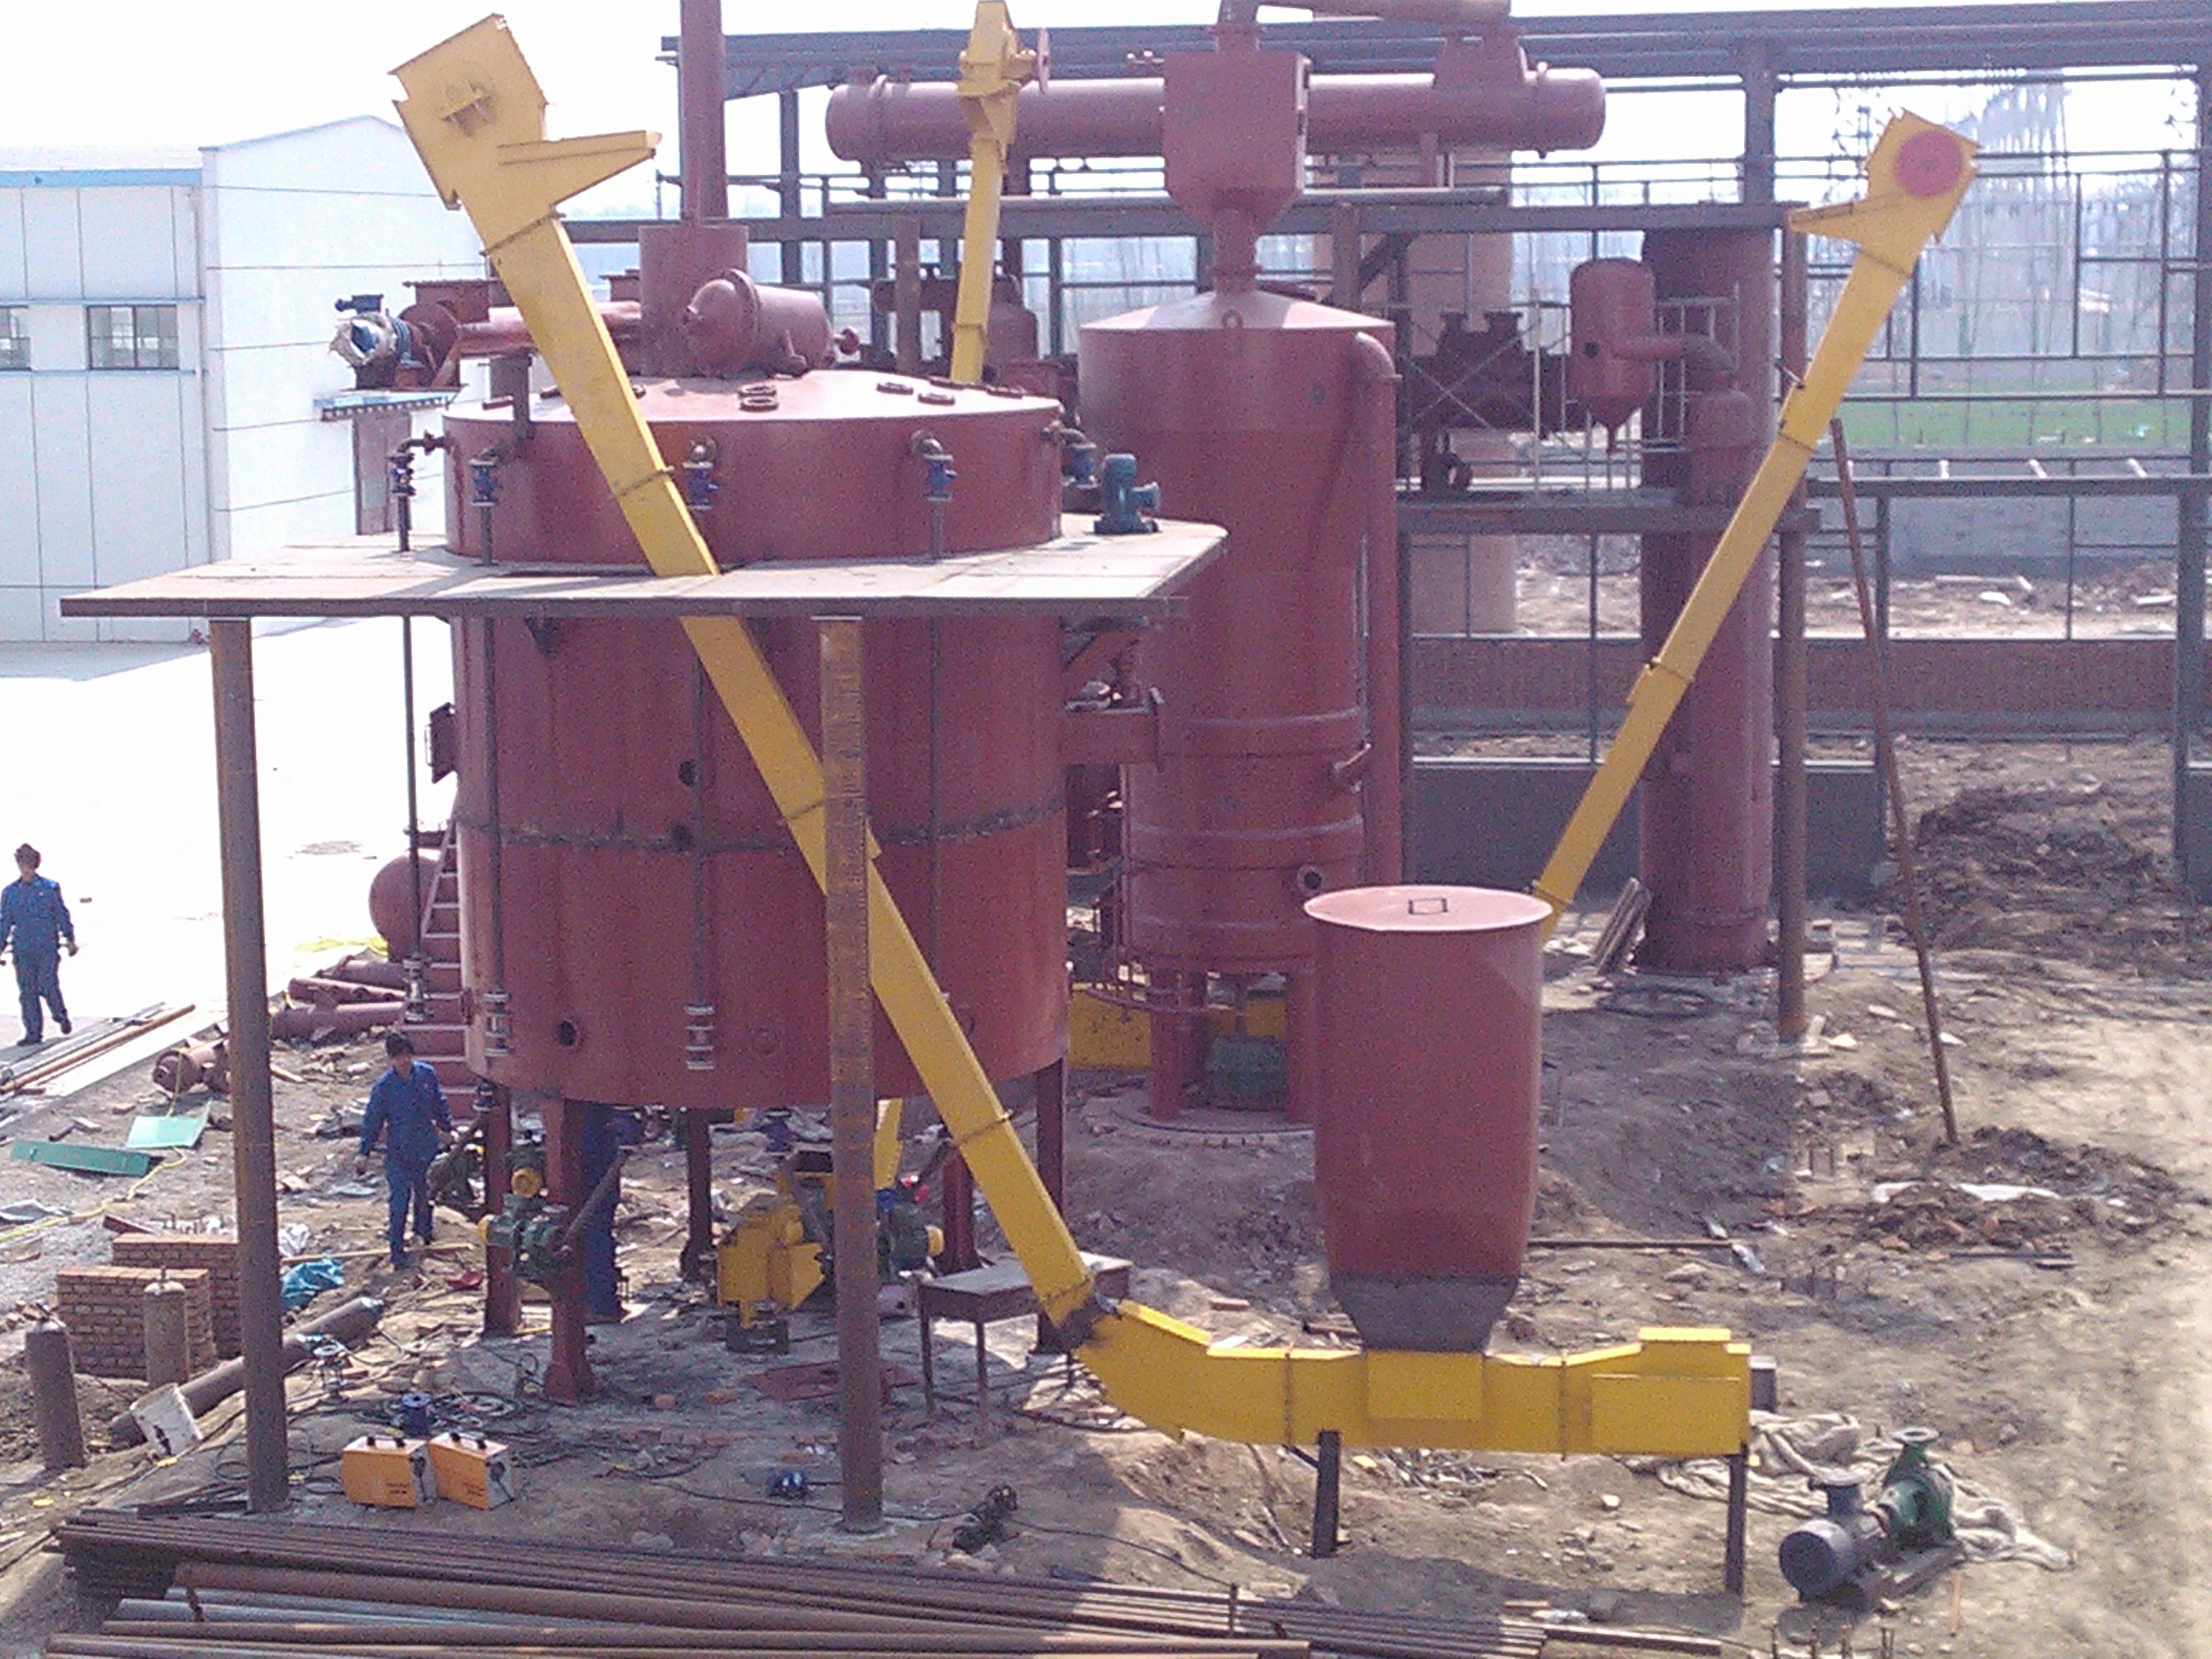 Xinjiang cottonseed oil leaching equipment installation site